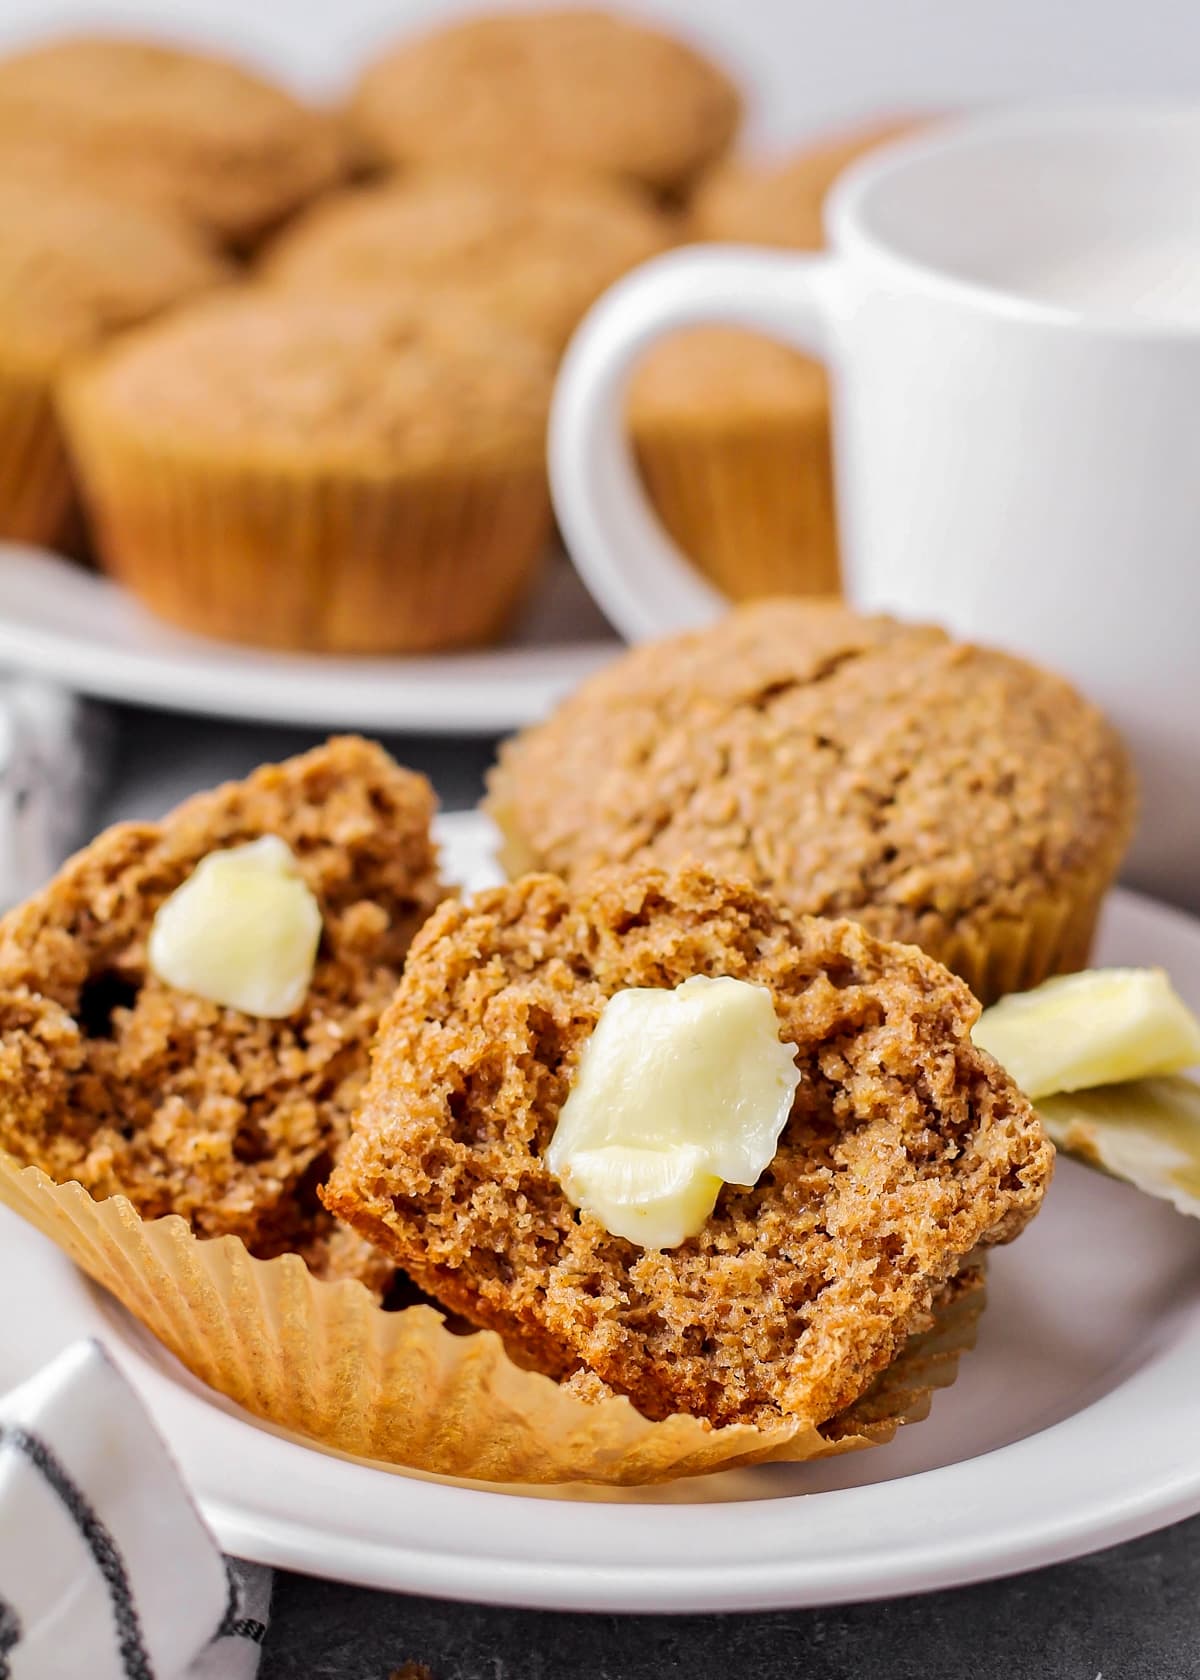 A bran muffin split in halg and topped with butter.